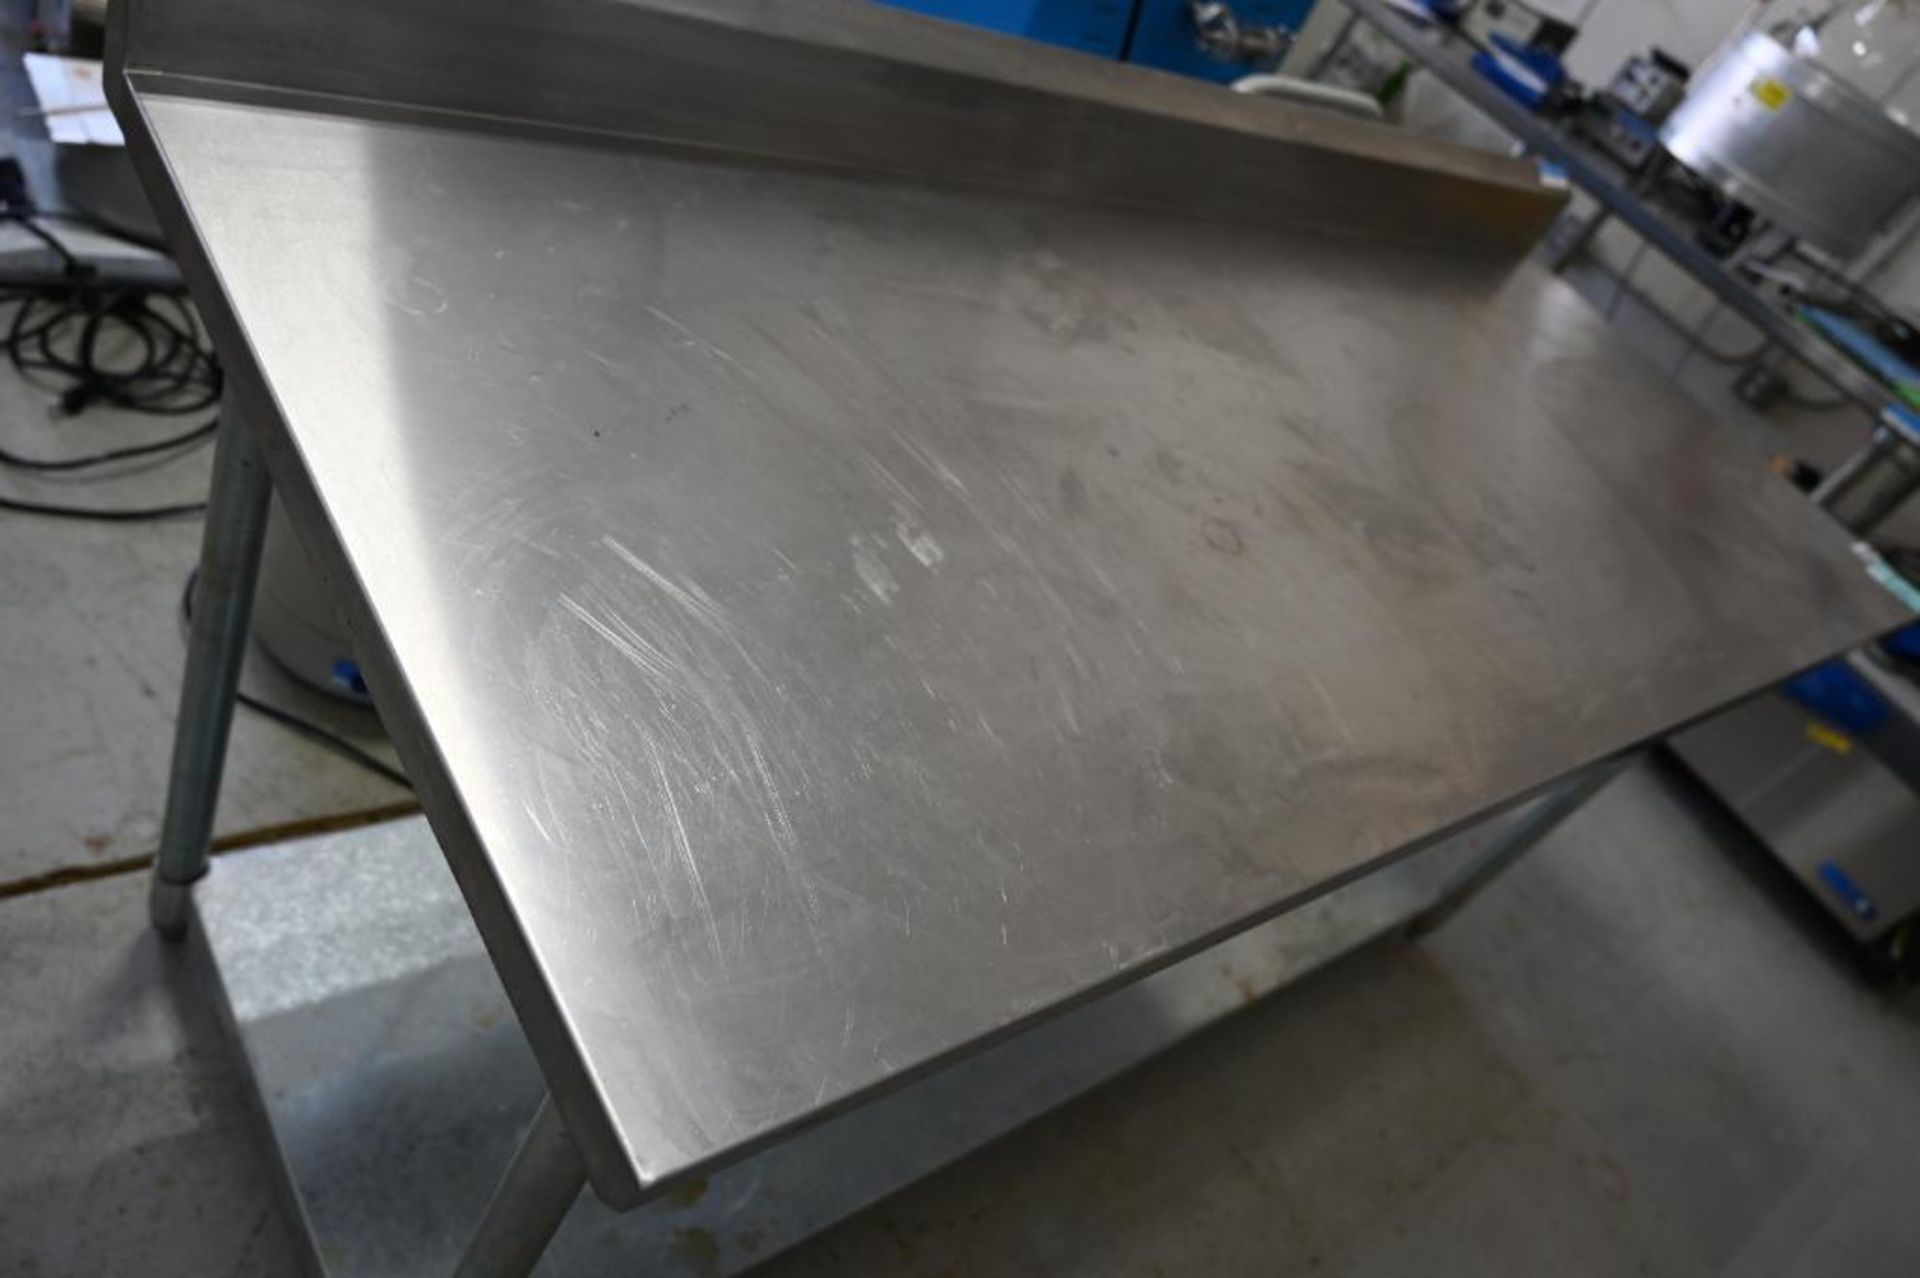 72" x 30.25"x 34.25" Stainless Steel Work Table with Back splash - Image 2 of 6